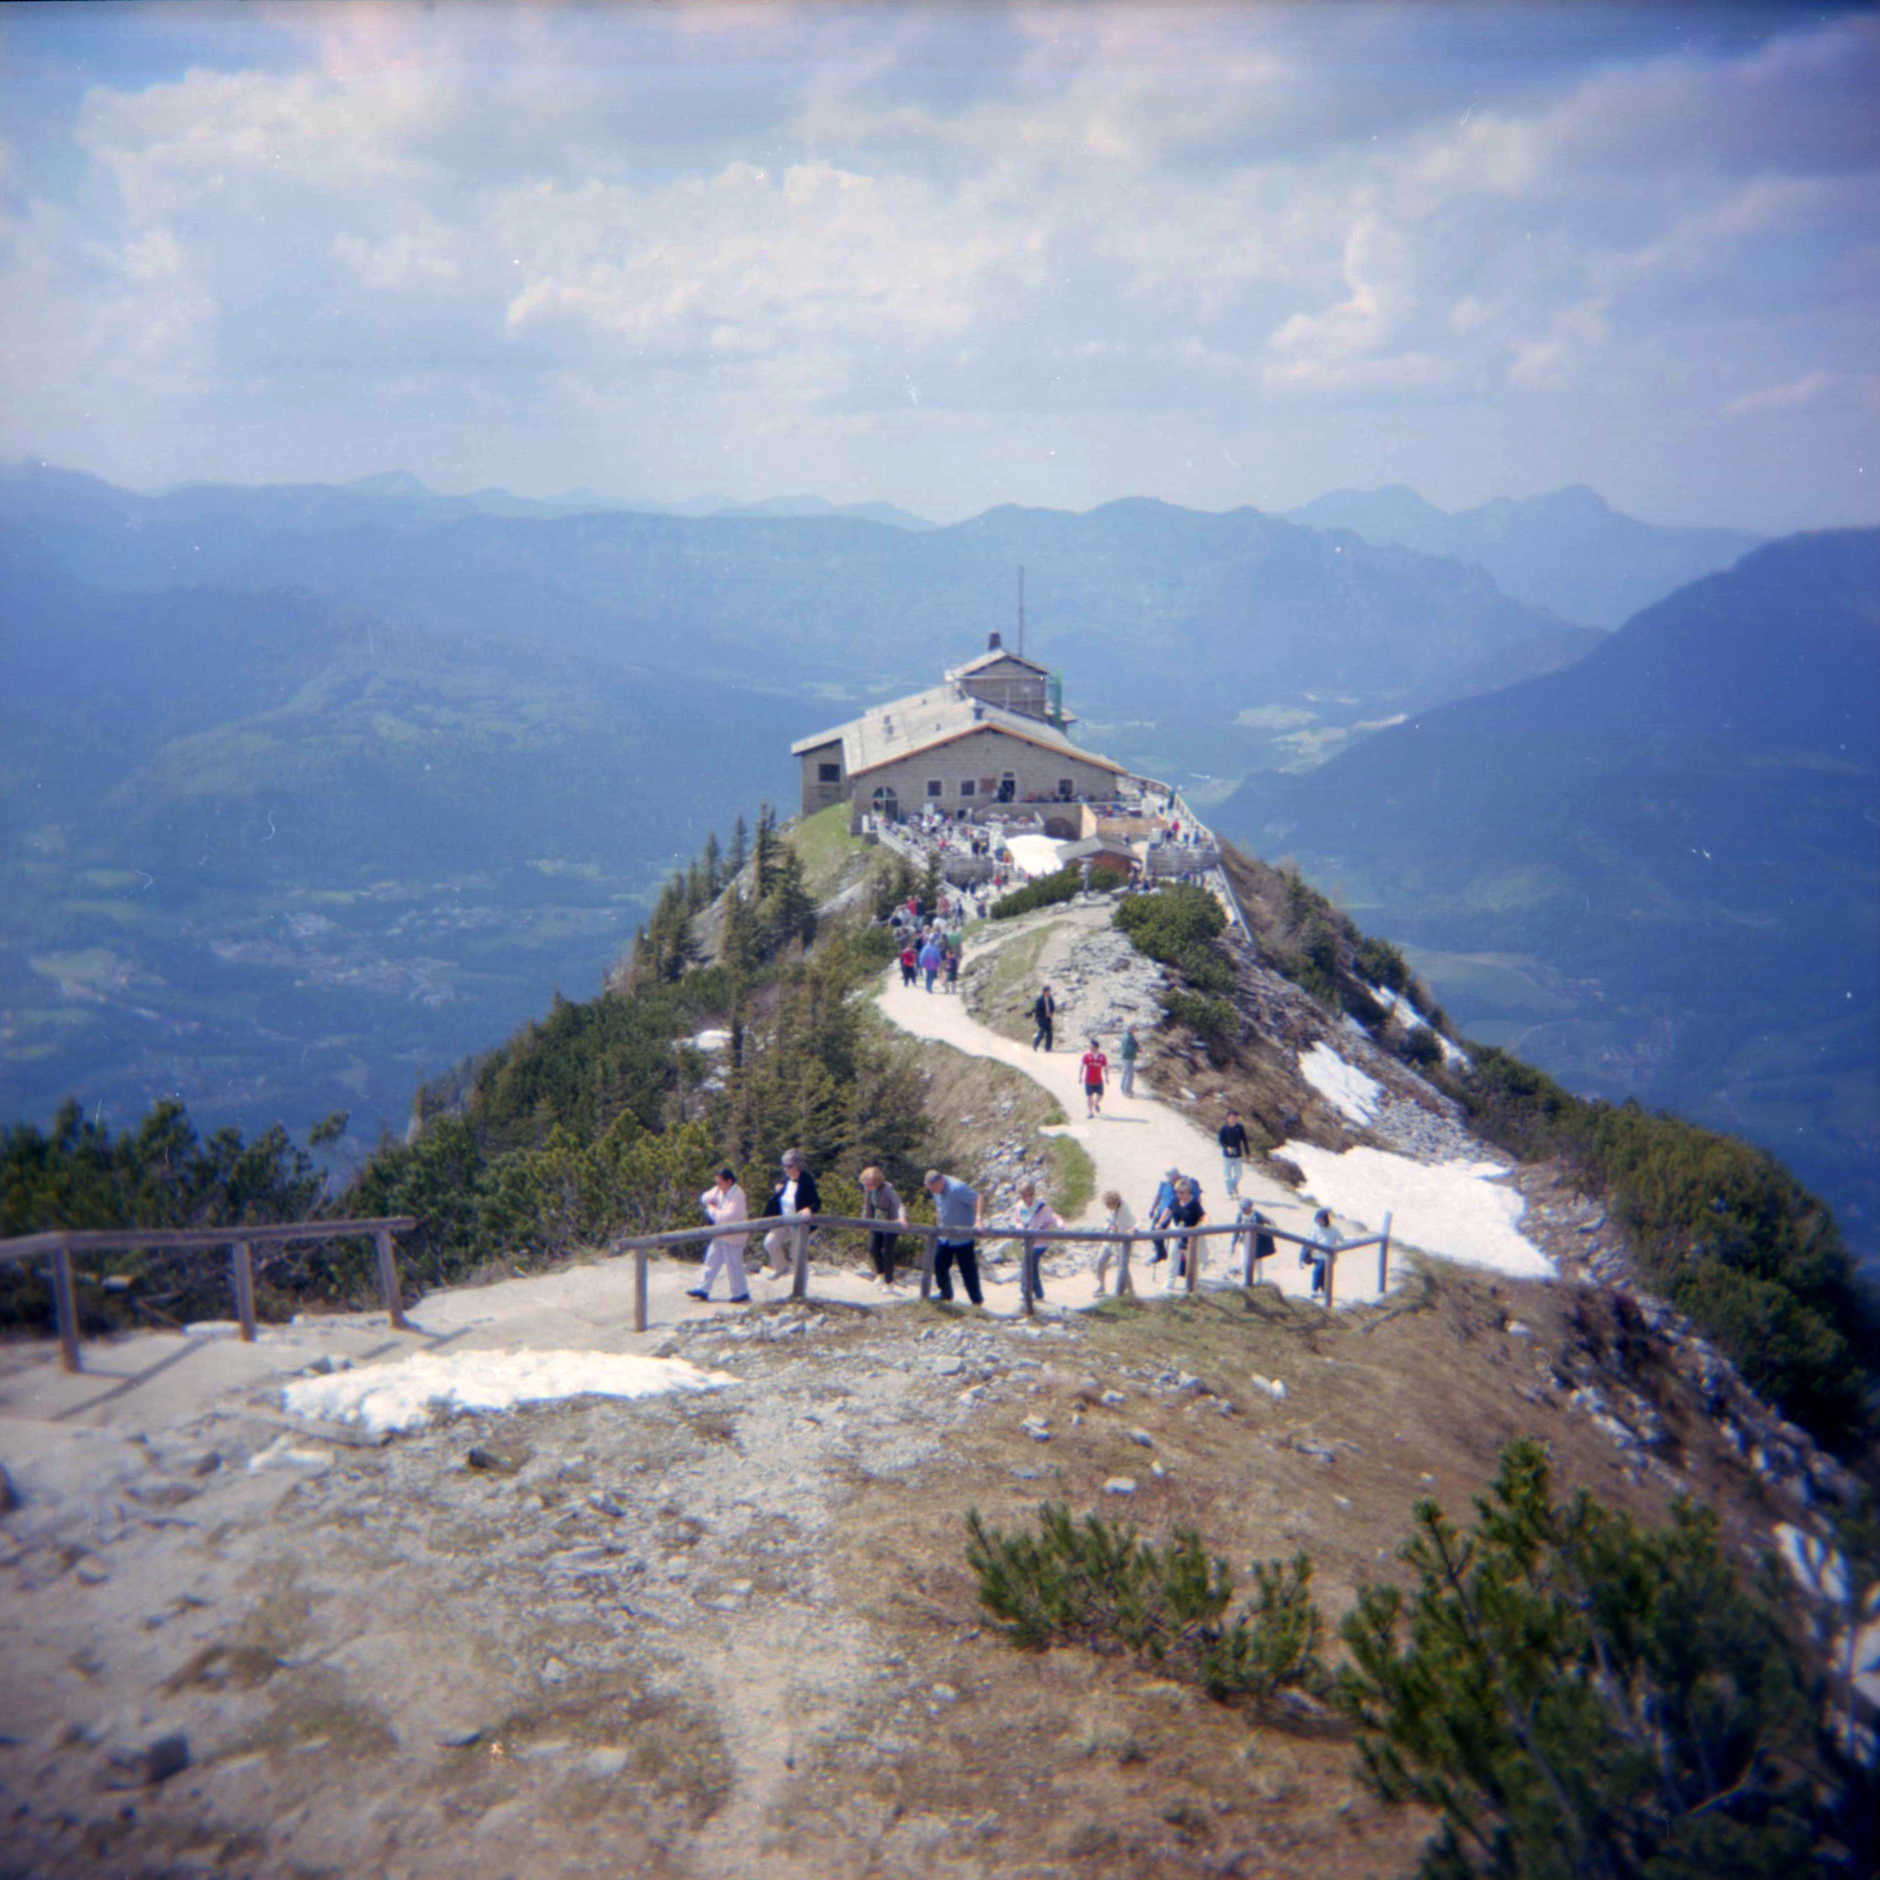 Eagle's Nest, Berchtesgaden, Germany – May 25, 2010. (Photo by James Brosher)